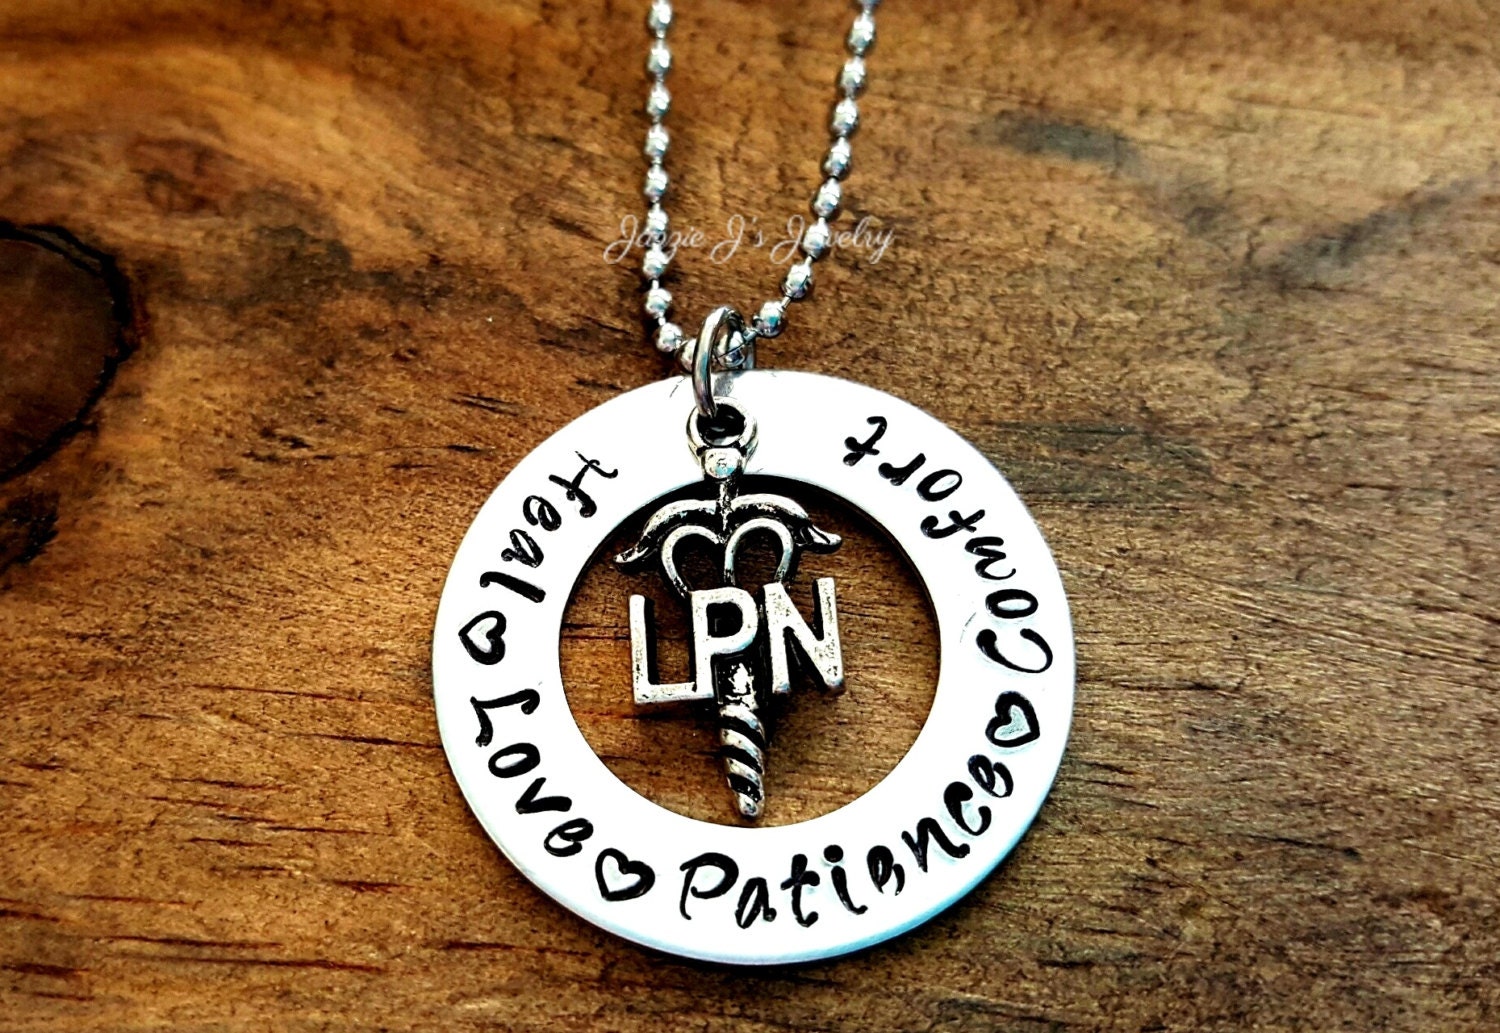 LPN Hand Stamped Necklace with LPN Charm Nurse Gift Heal